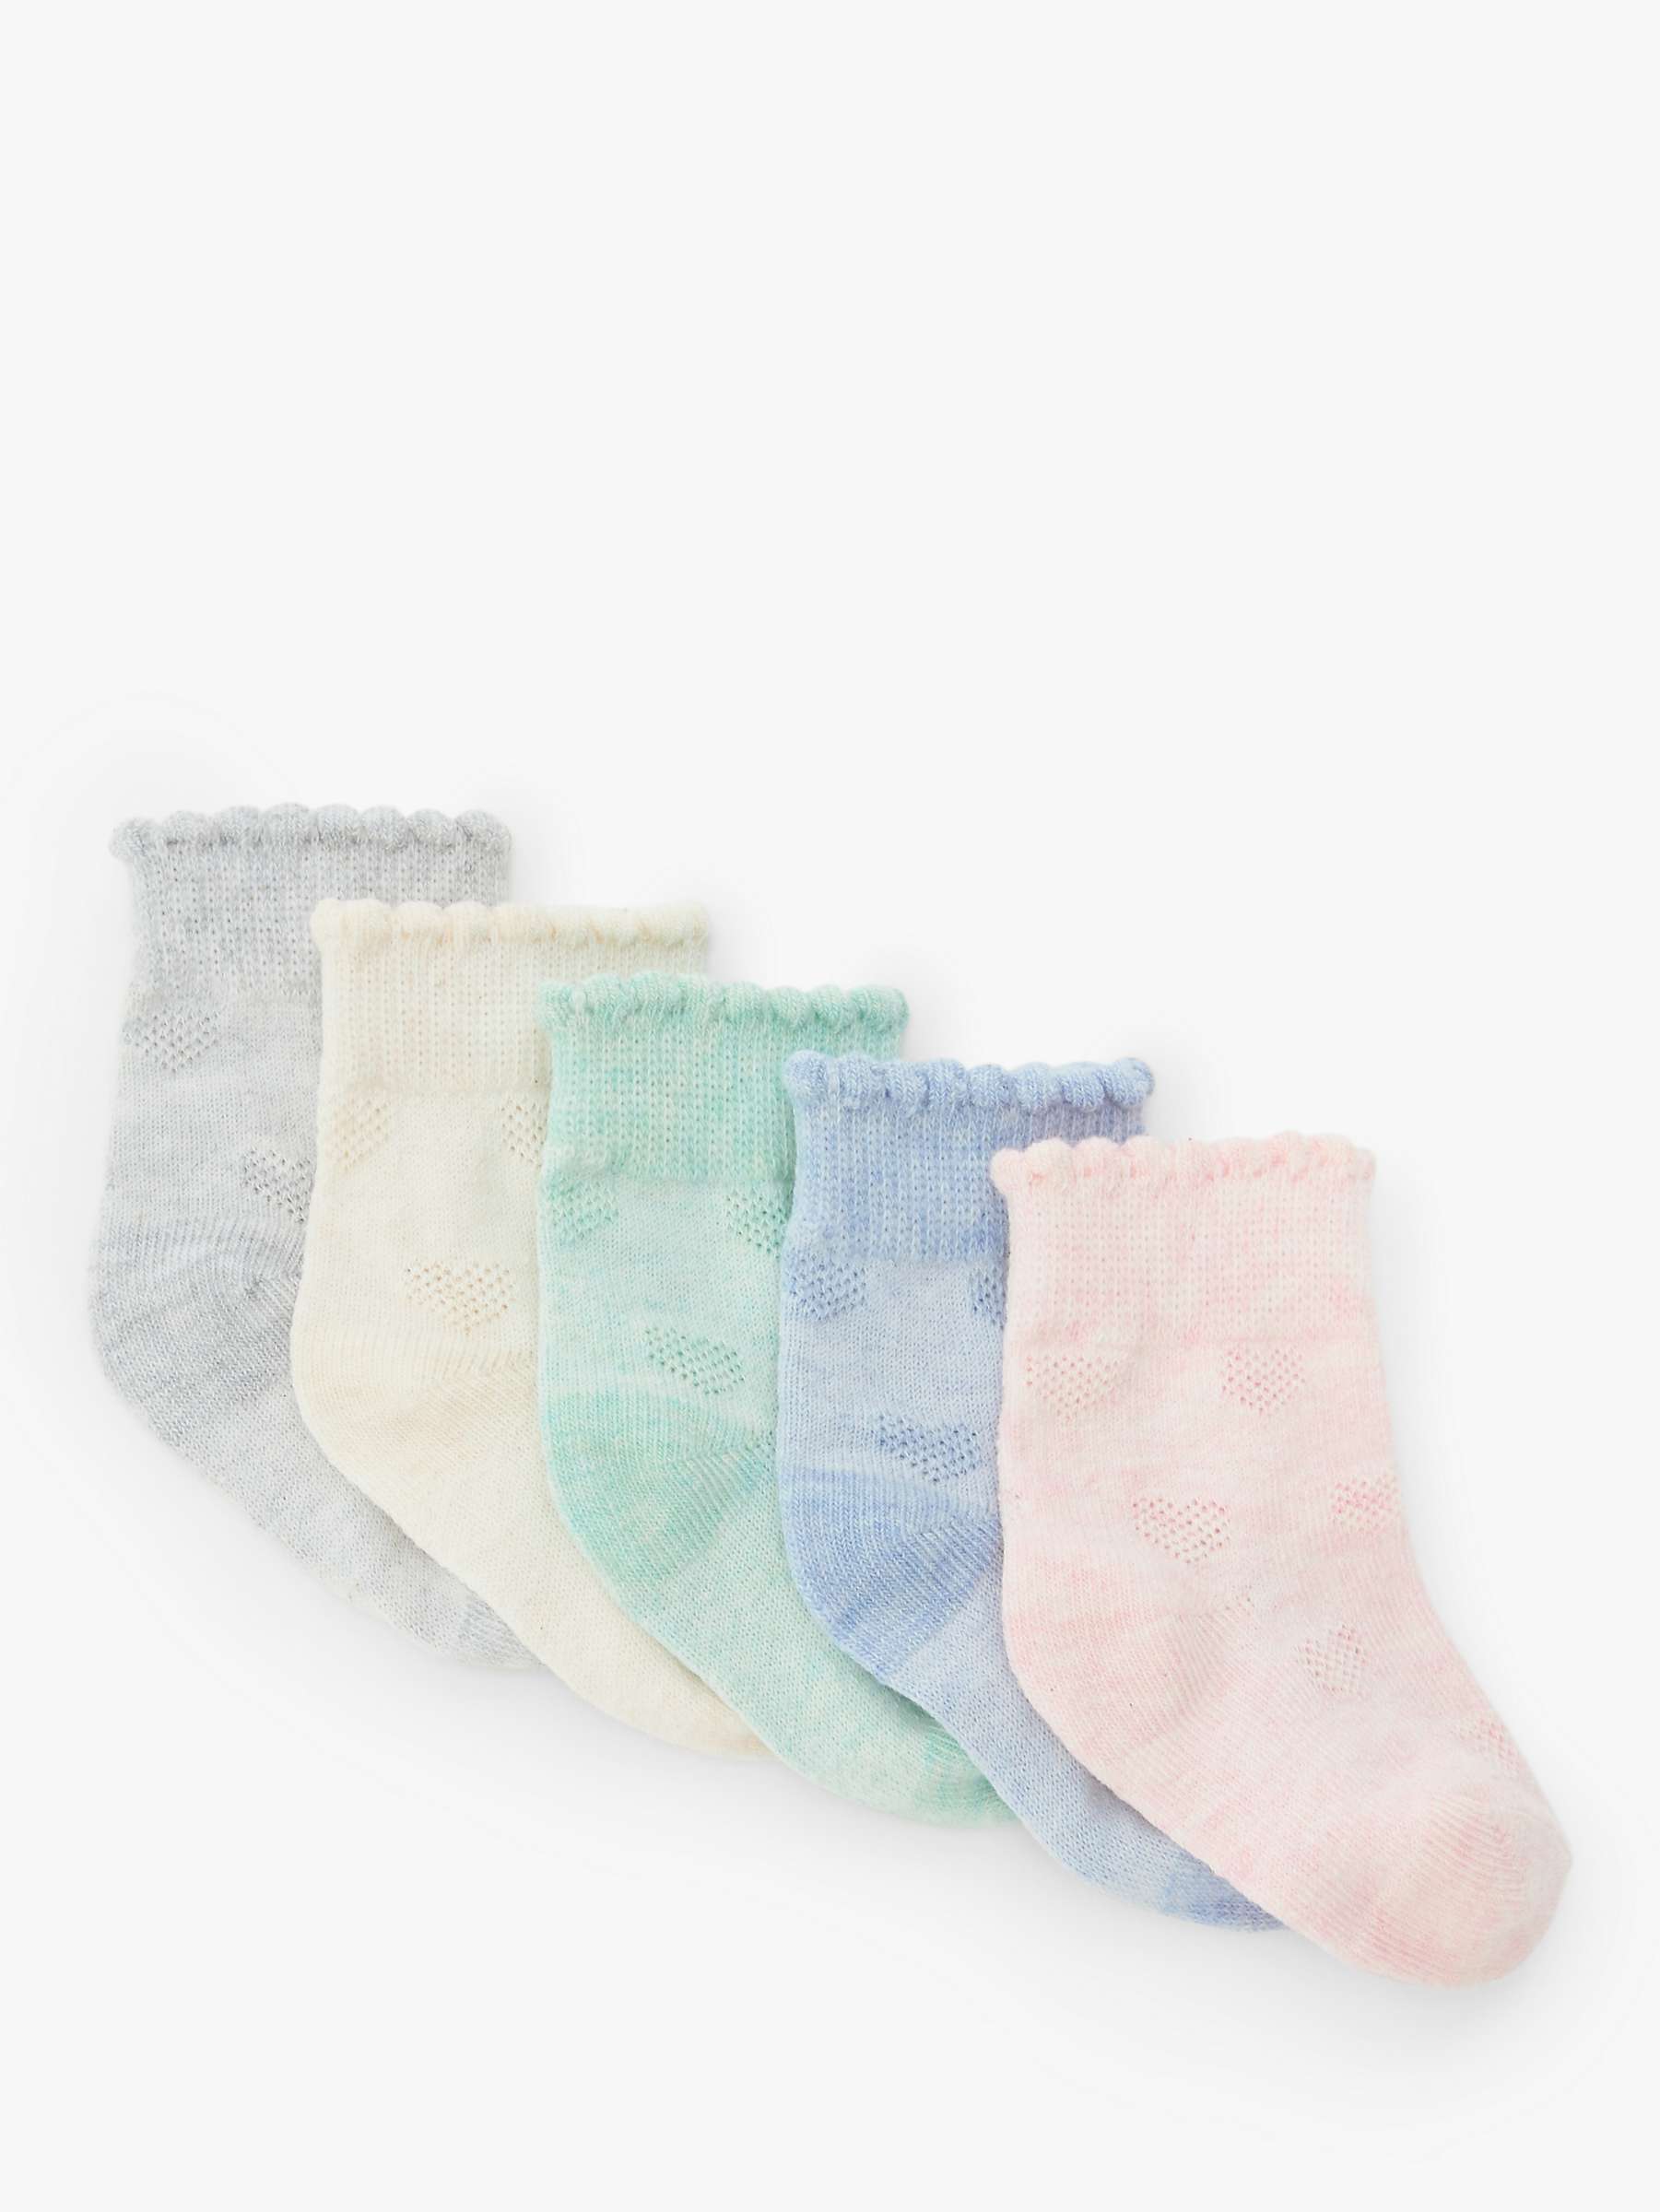 Buy John Lewis Baby Pretty Heart Embroidered Organic Cotton Blend Socks, Pack of 5, Multi Online at johnlewis.com